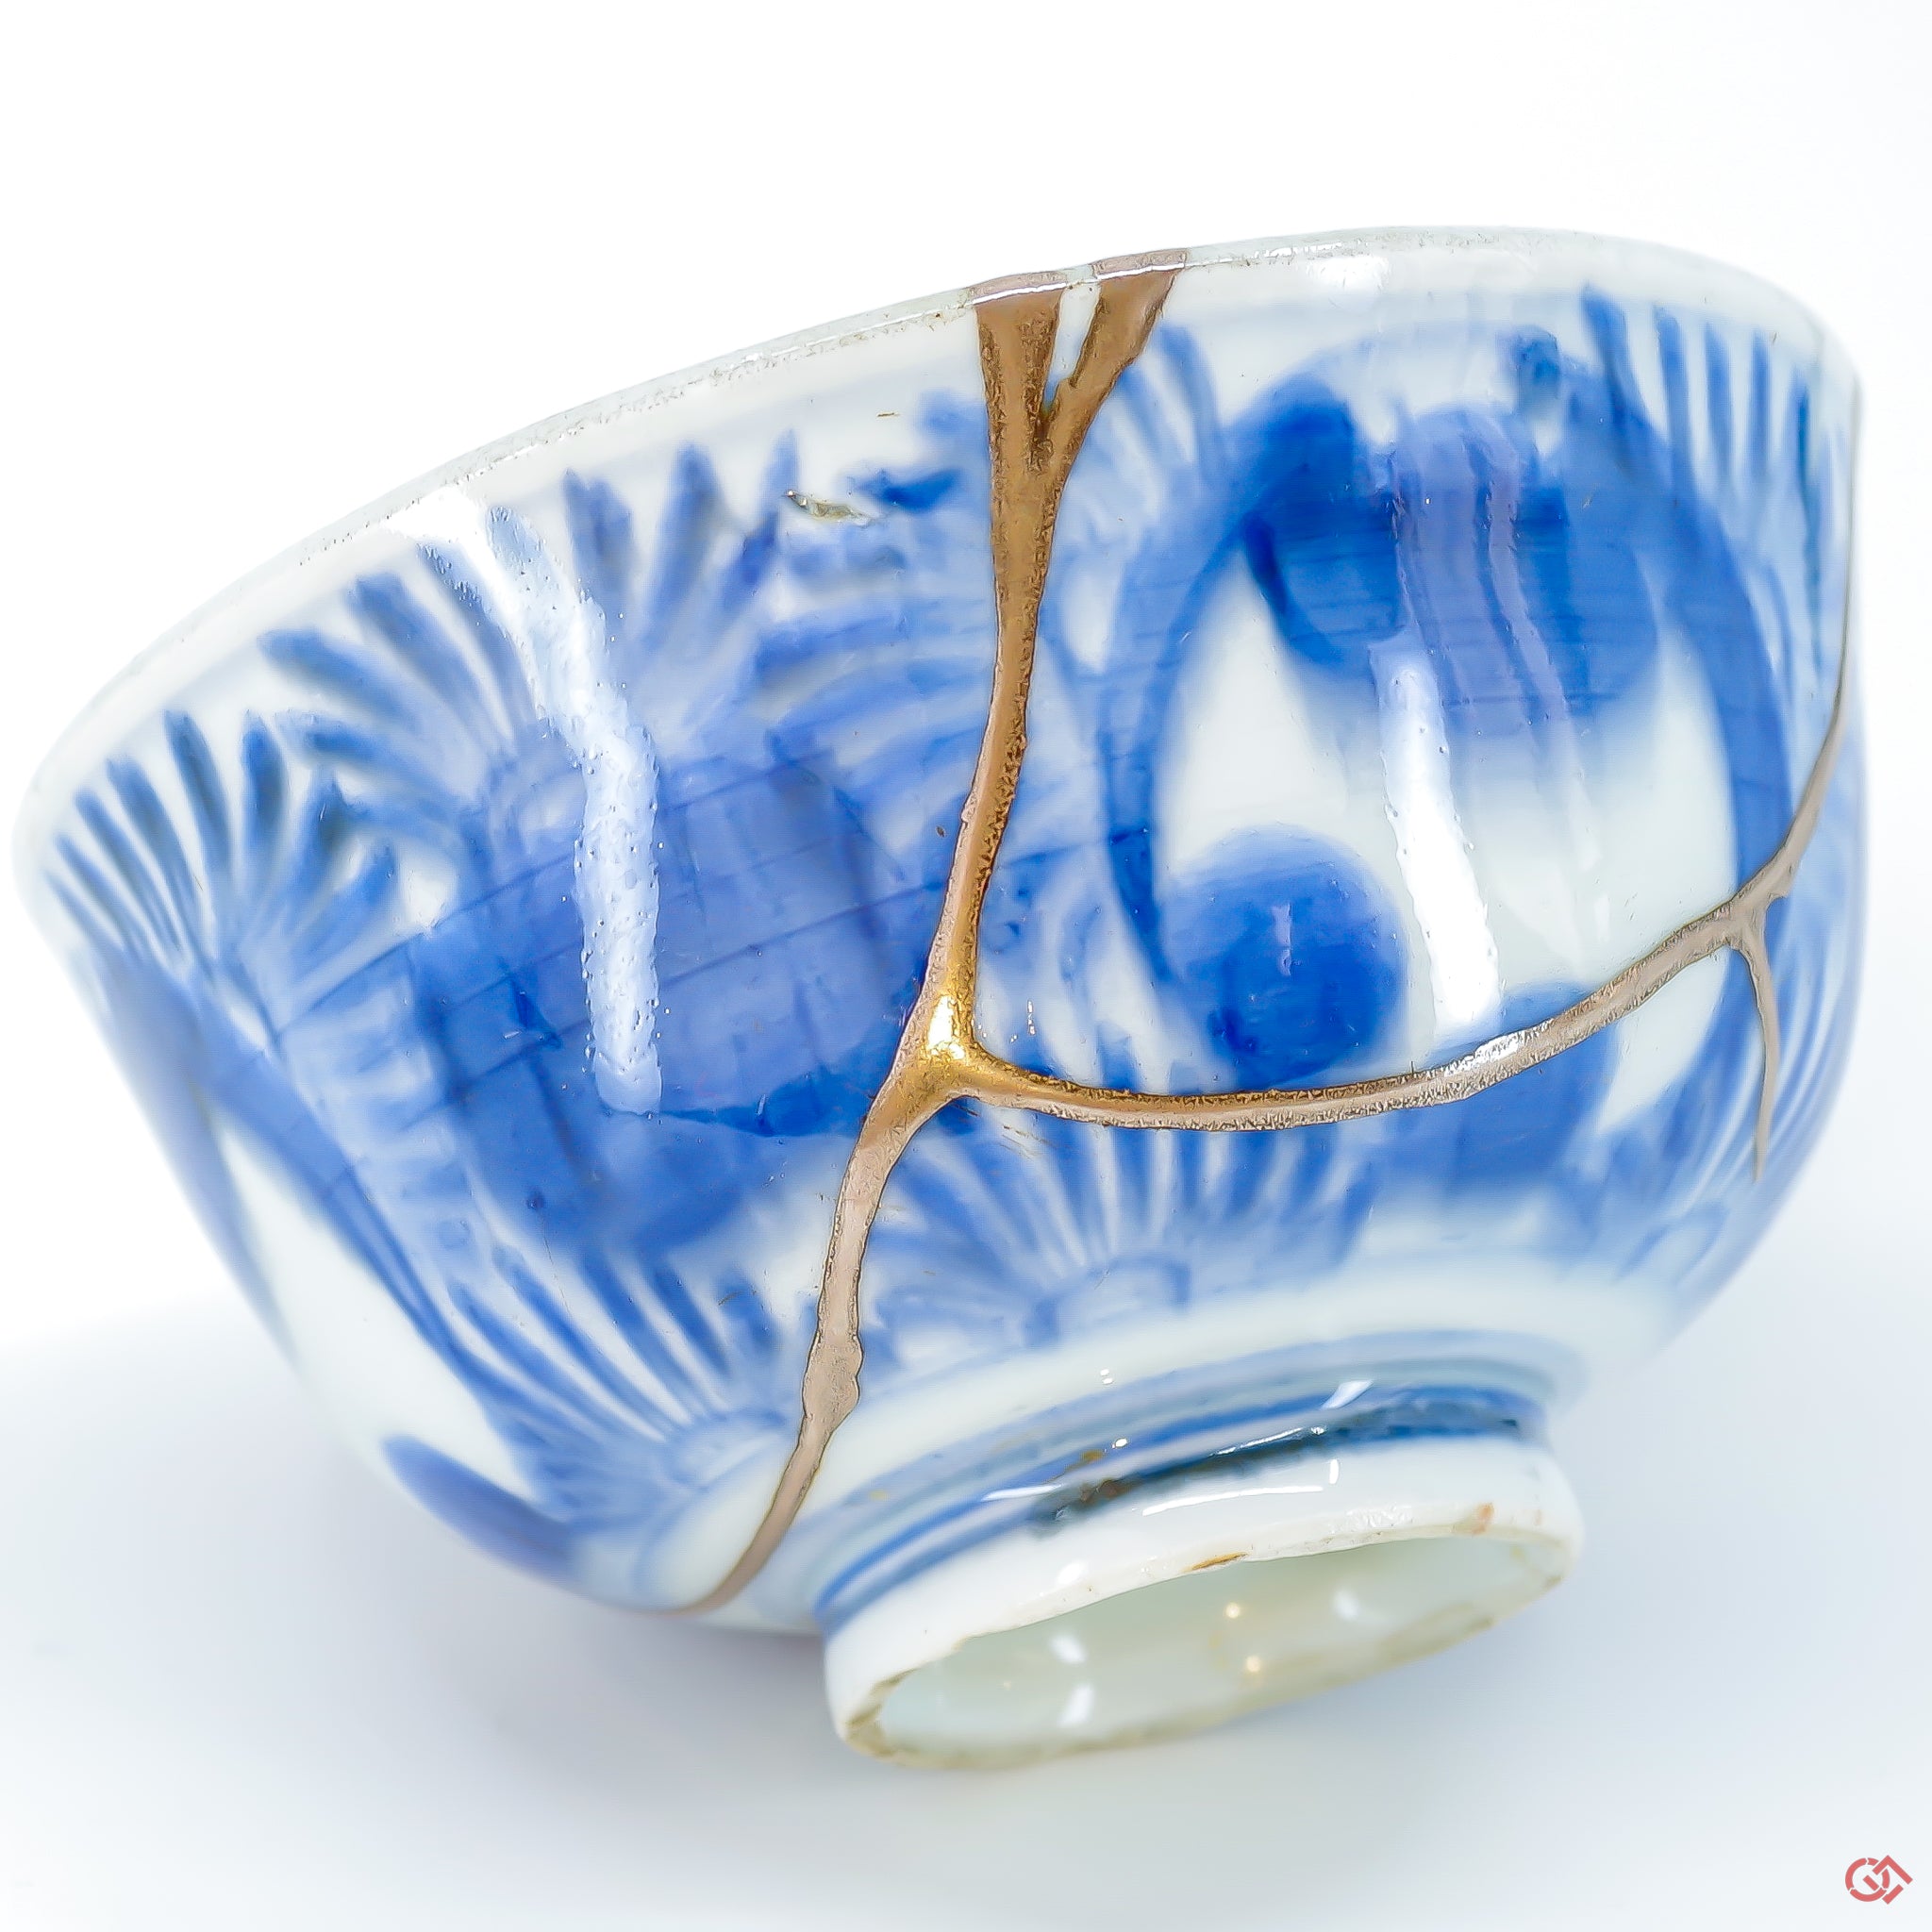 A close-up photo of an authentic Kintsugi pottery piece, showing the detail of its repairs and artisty. craftsmanship.